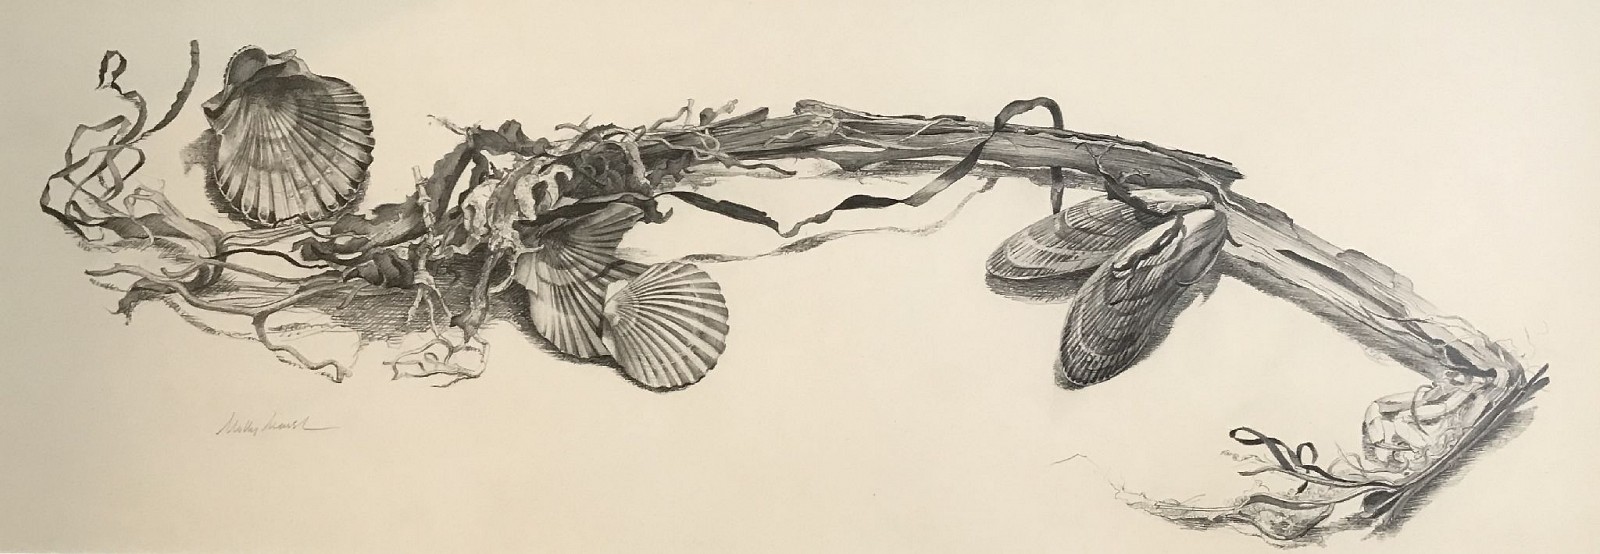 Molly Marsh, Scallops, Mussels
Sea Series  #73
pencil on paper, 8" x 21 3/4" ss
signed, Molly Marsh, lower left
JCA 5728
$750